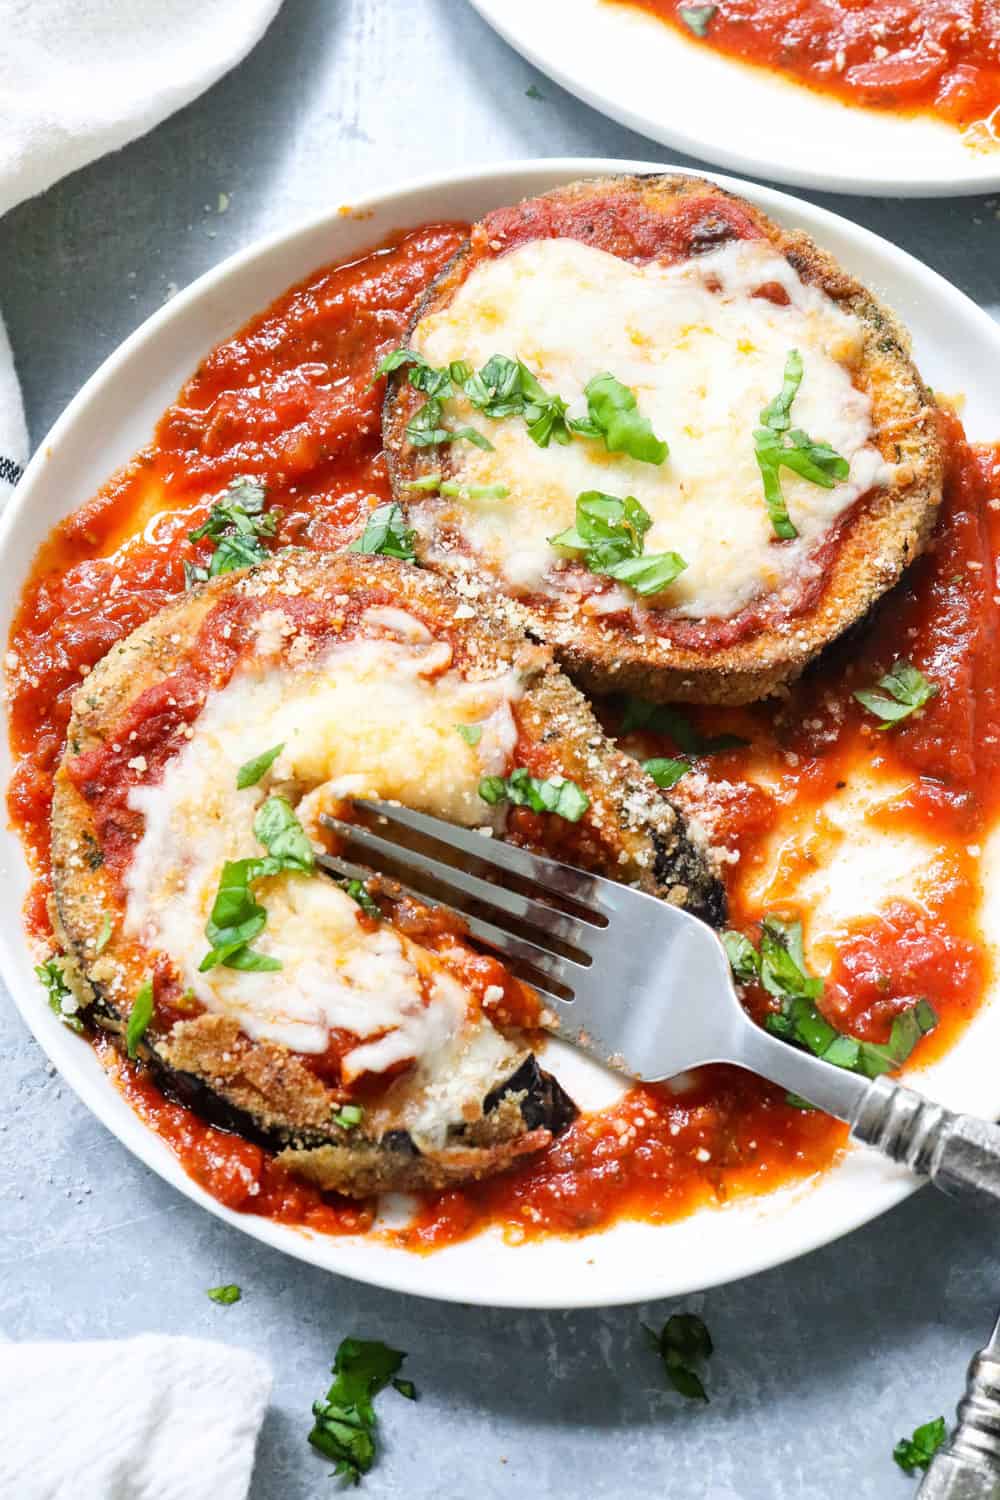 Sliced and coated healthy eggplant parmesan in tomato sauce and topped with melted cheese and chopped herbs